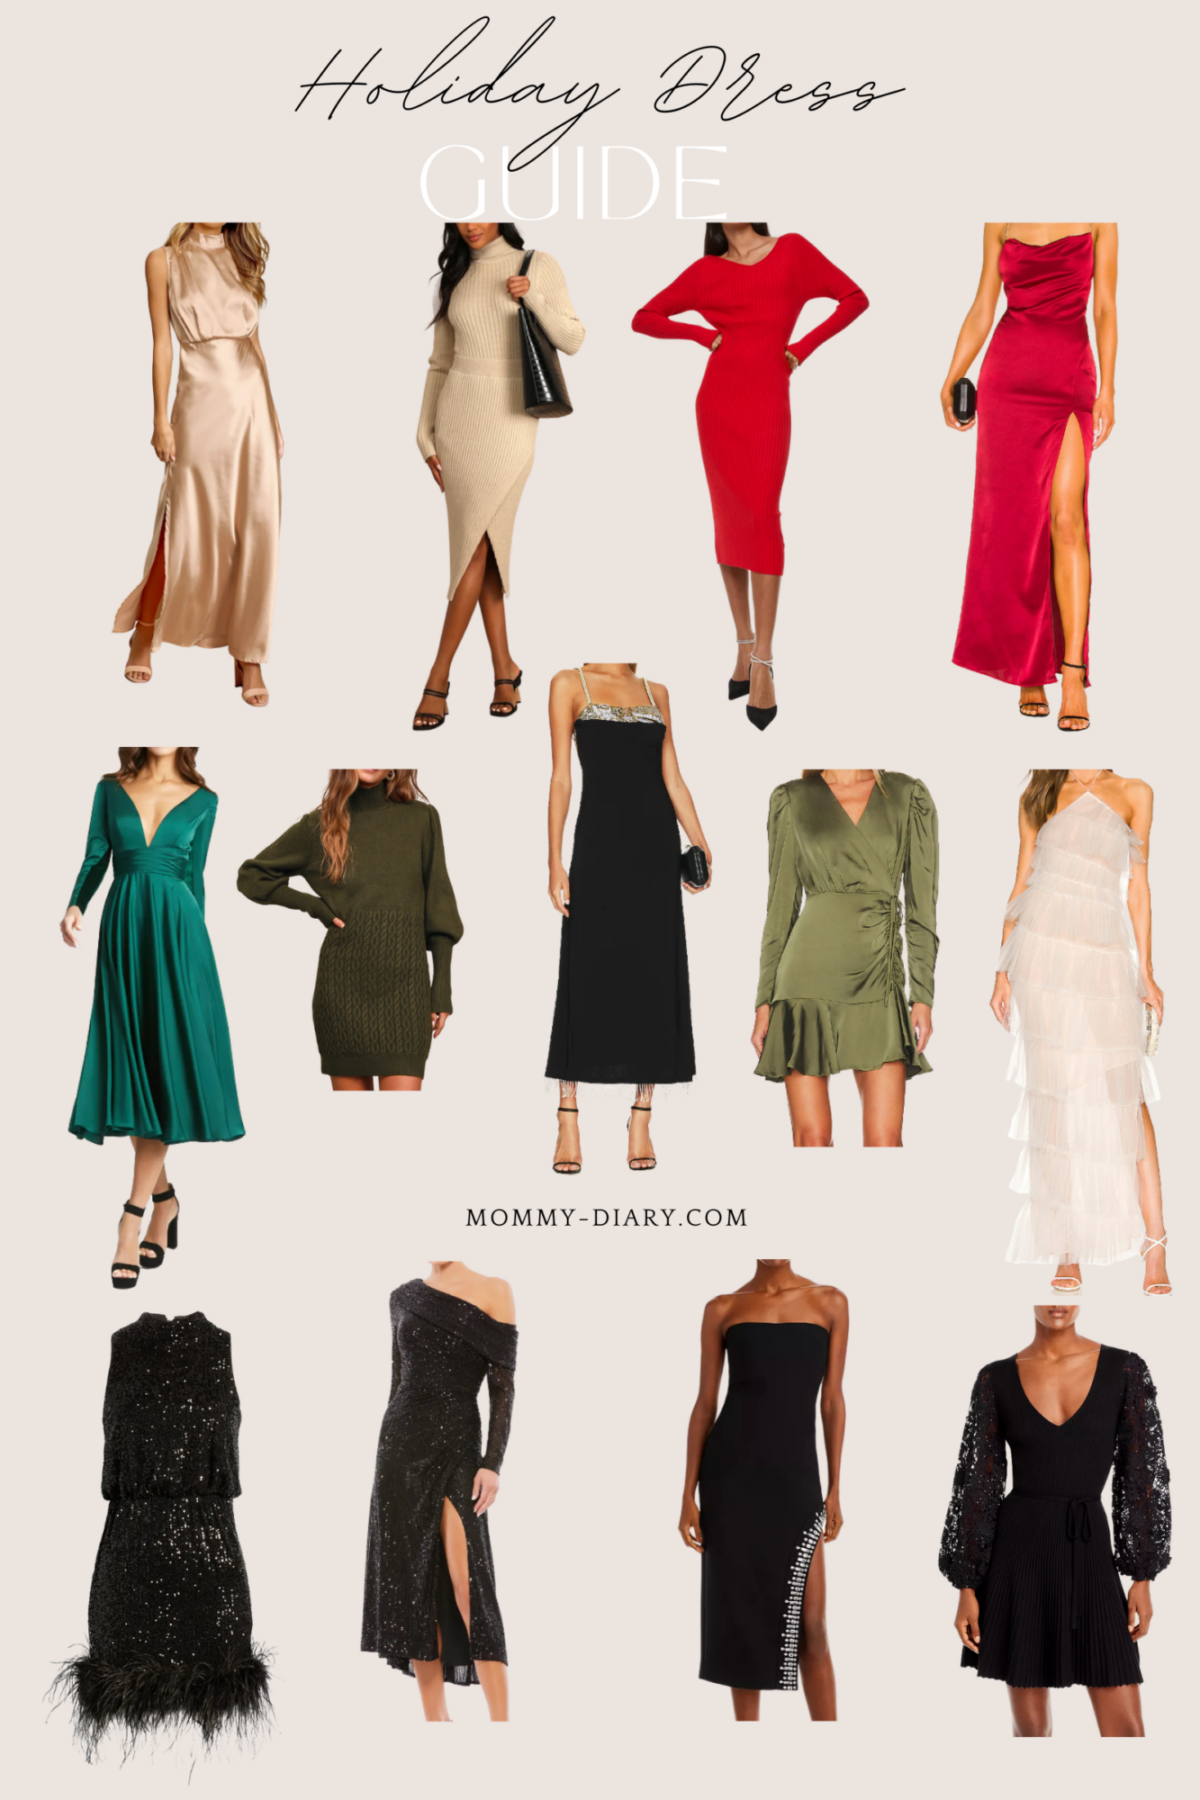 Holiday Dress Guide